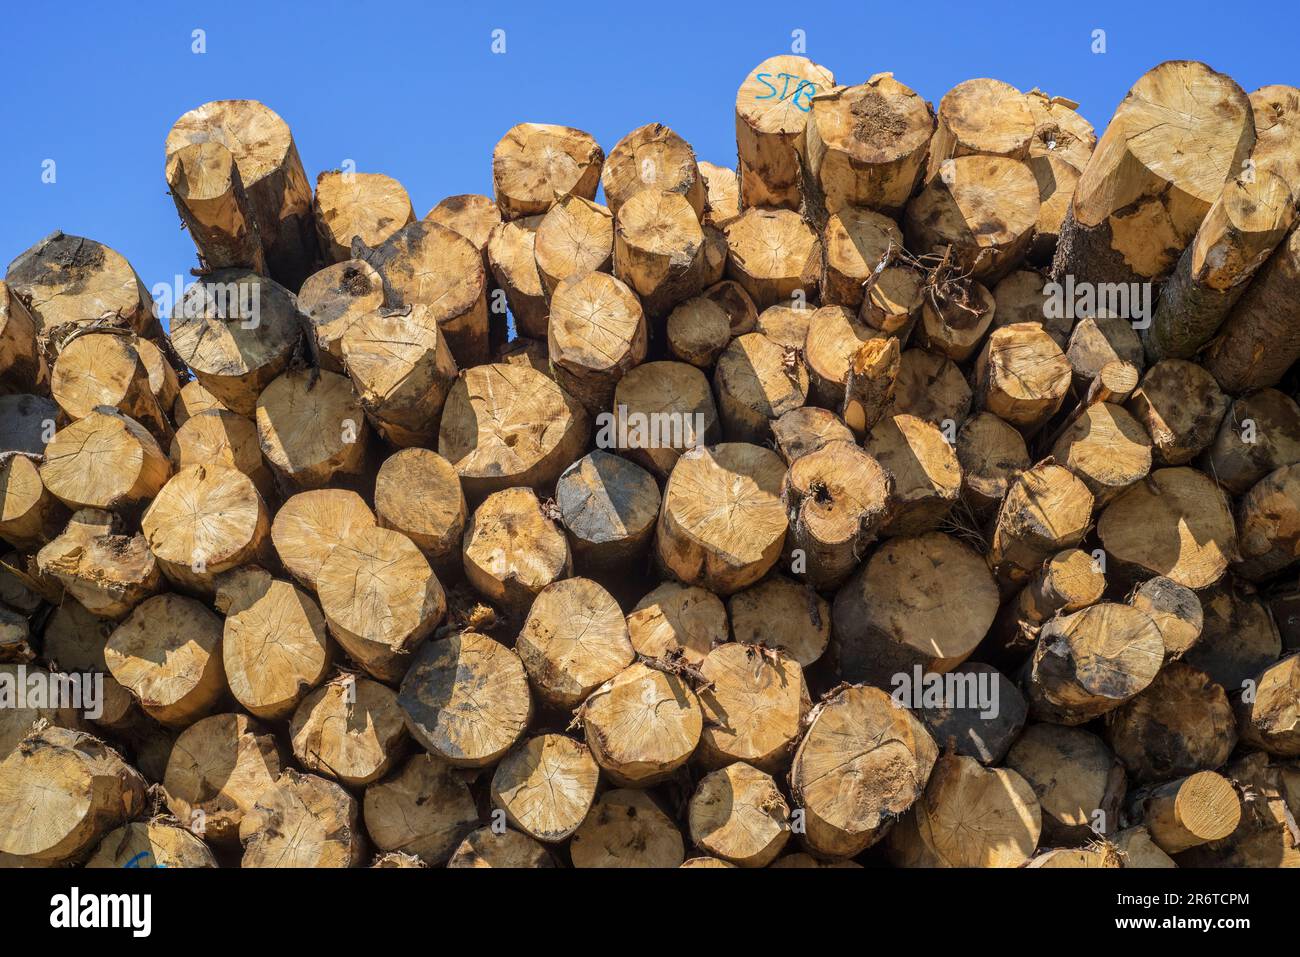 Deforestation by logging industry showing huge wood pile of tree trunks / logs in coniferous clearcut forest, Vlessart, Belgian Ardennes, Belgium Stock Photo